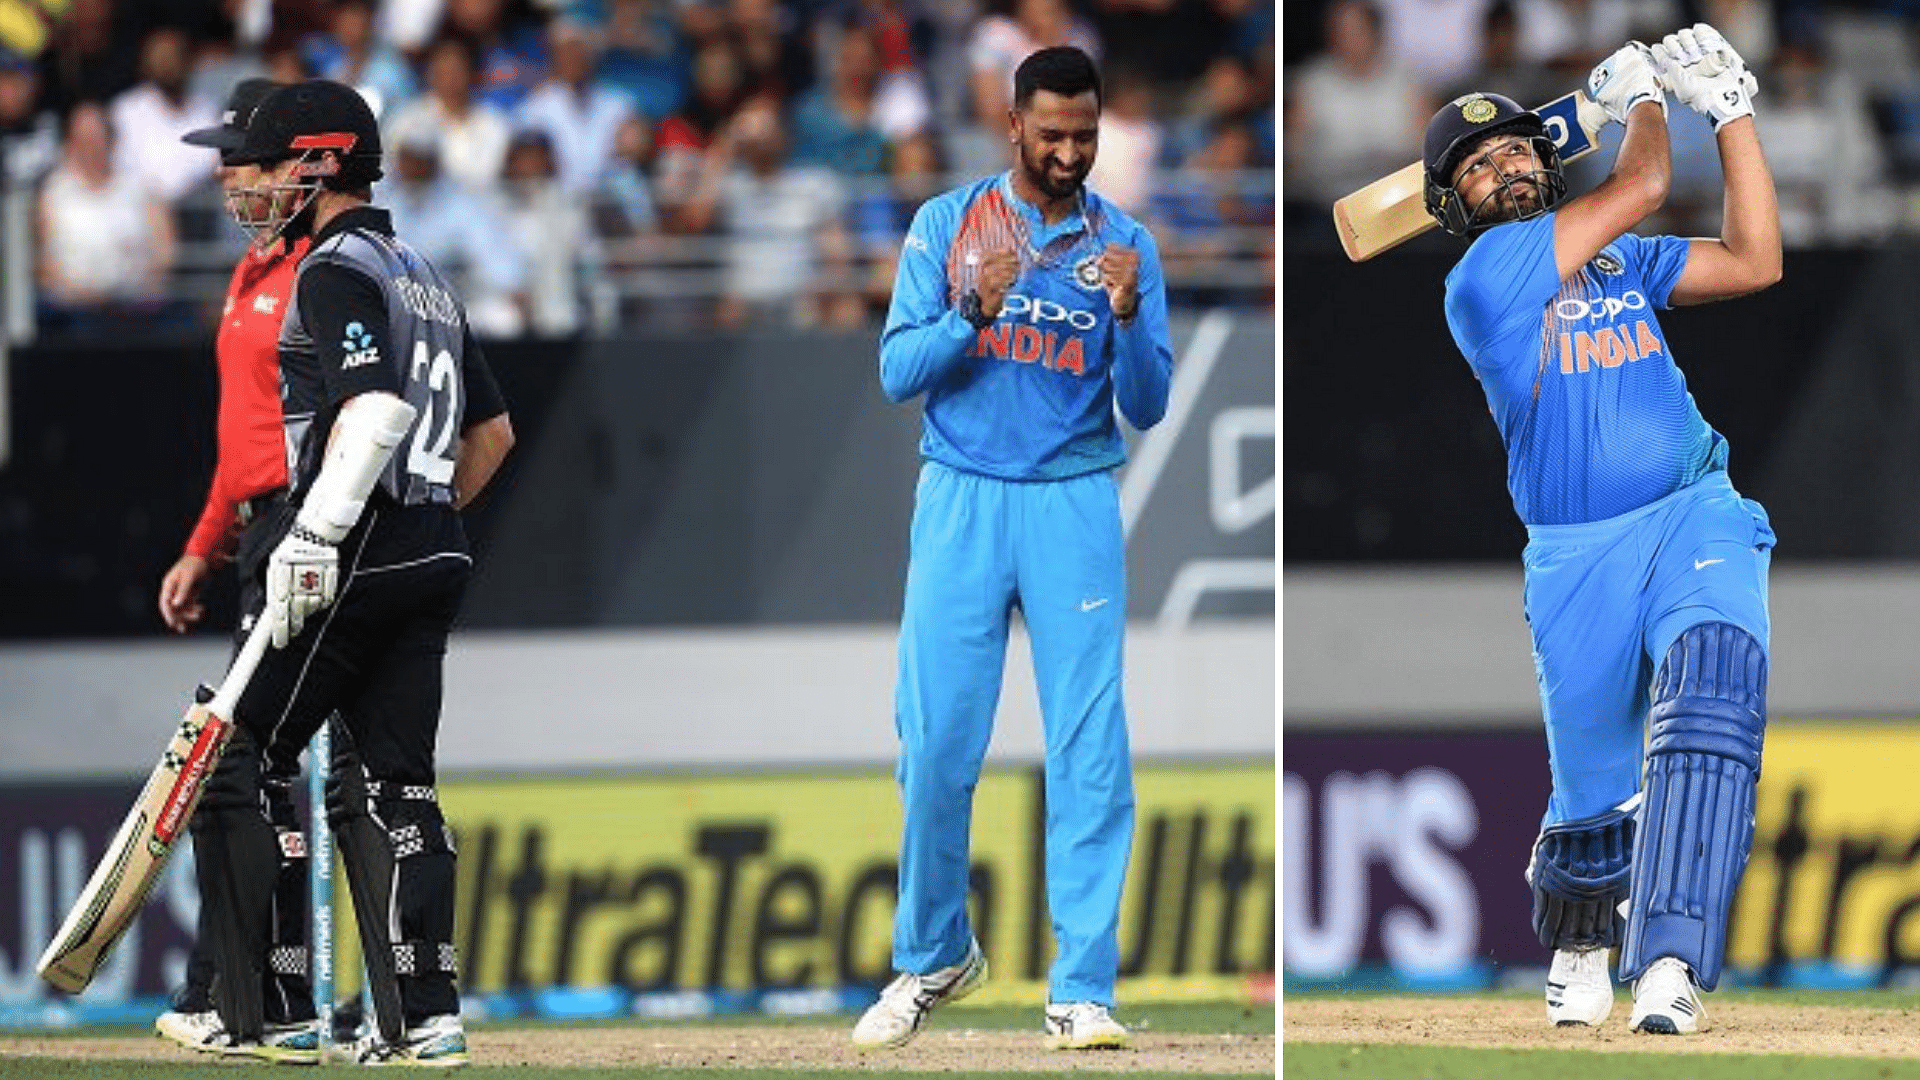 Krunal Pandya (3/28) and Rohit Sharma (50) played starring roles in India’s x-wicket win in the second T20I vs New Zealand at Auckland.